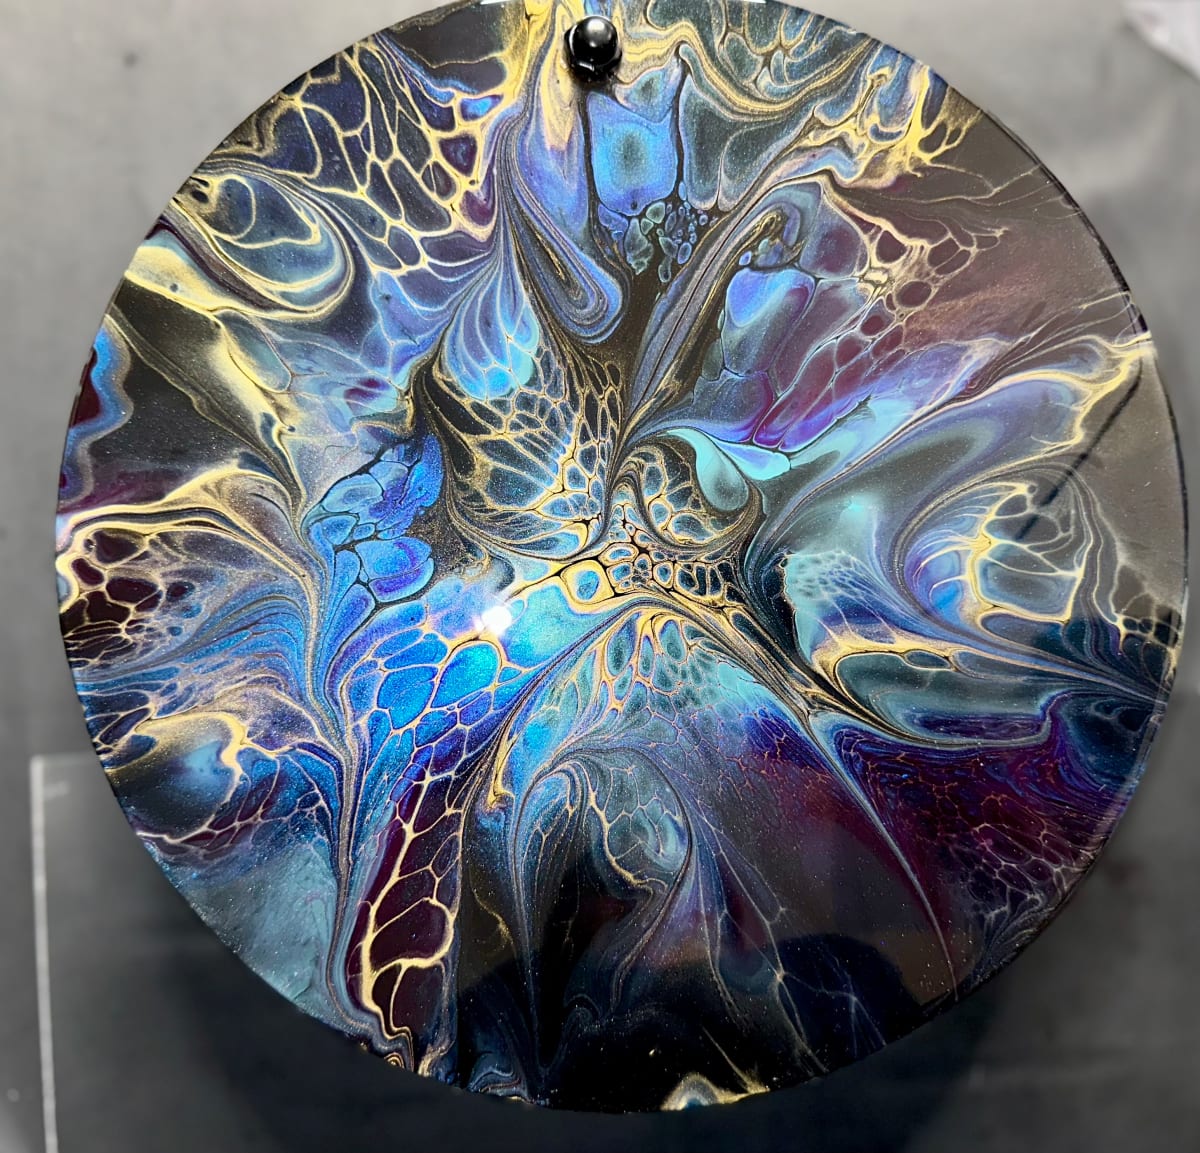 Celestial Beauty 11” Round Jewelry Box by Pourin’ My Heart Out - Fluid Art by Angela Lloyd 